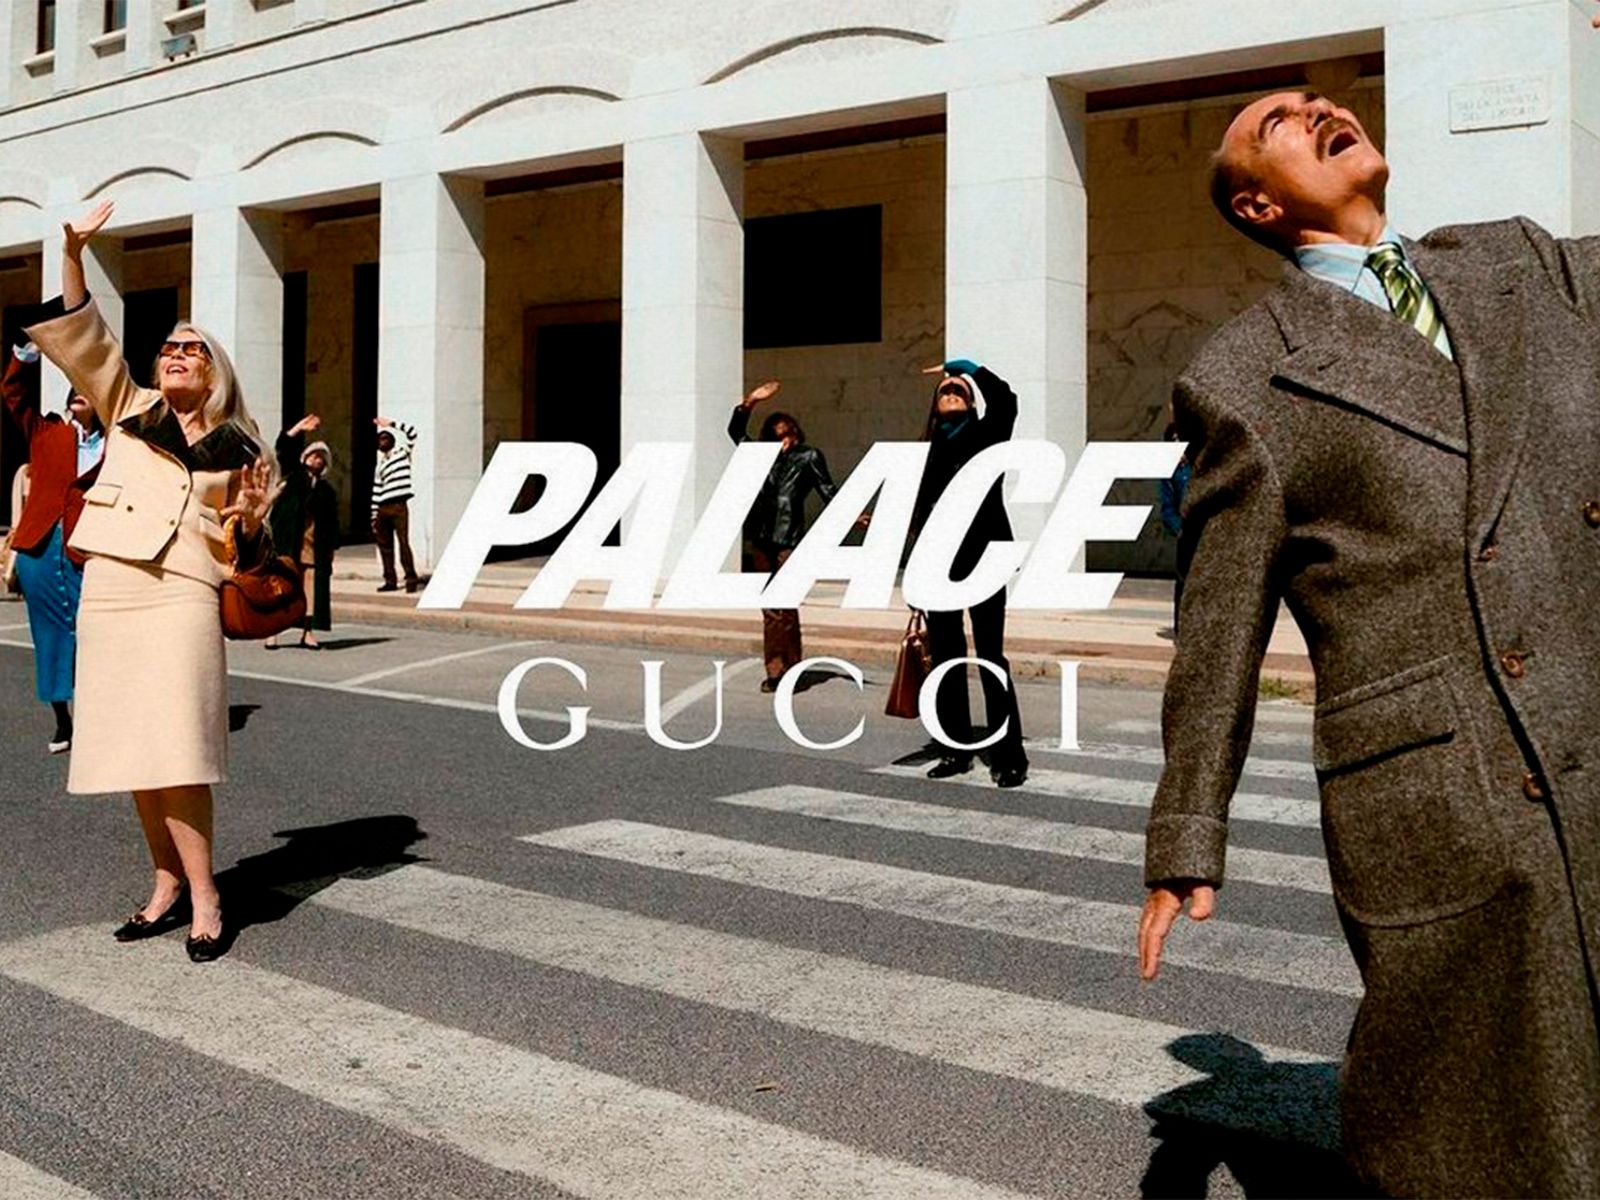 First details of the Palace and Gucci collaboration